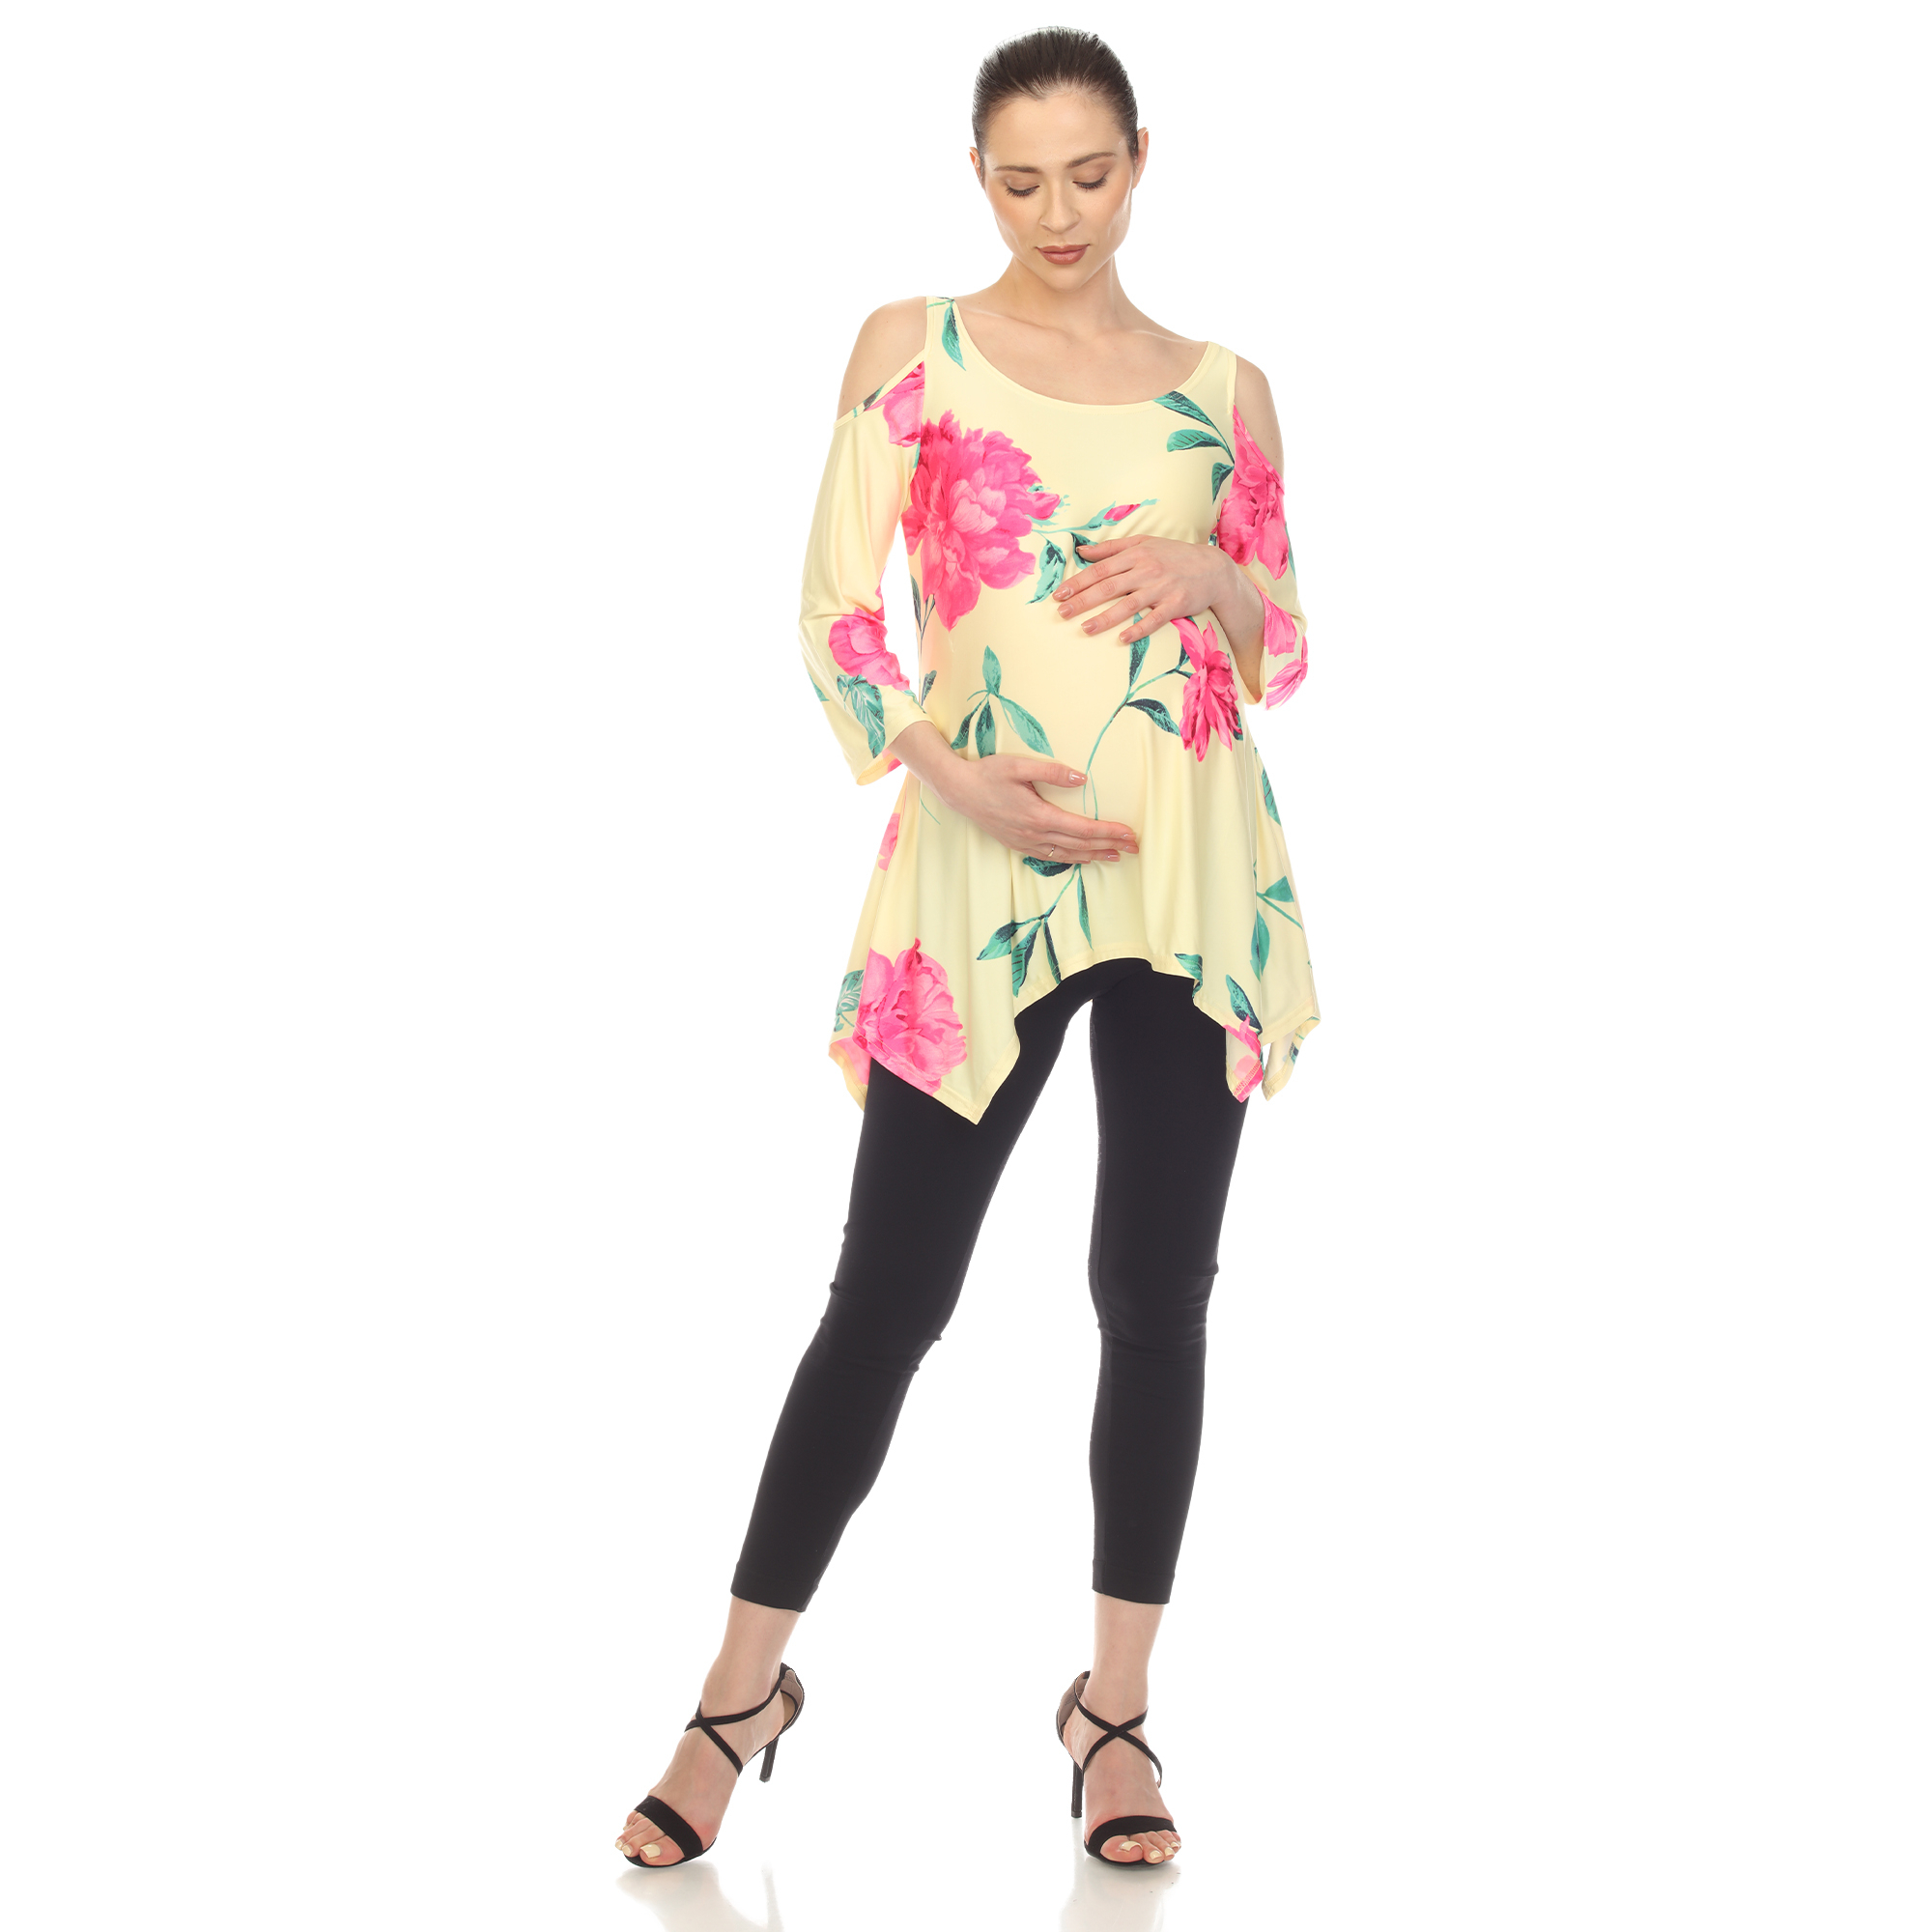 White Mark Women's Maternity Floral Cold Shoulder Tunic Top - Yellow/Pink, X-Large